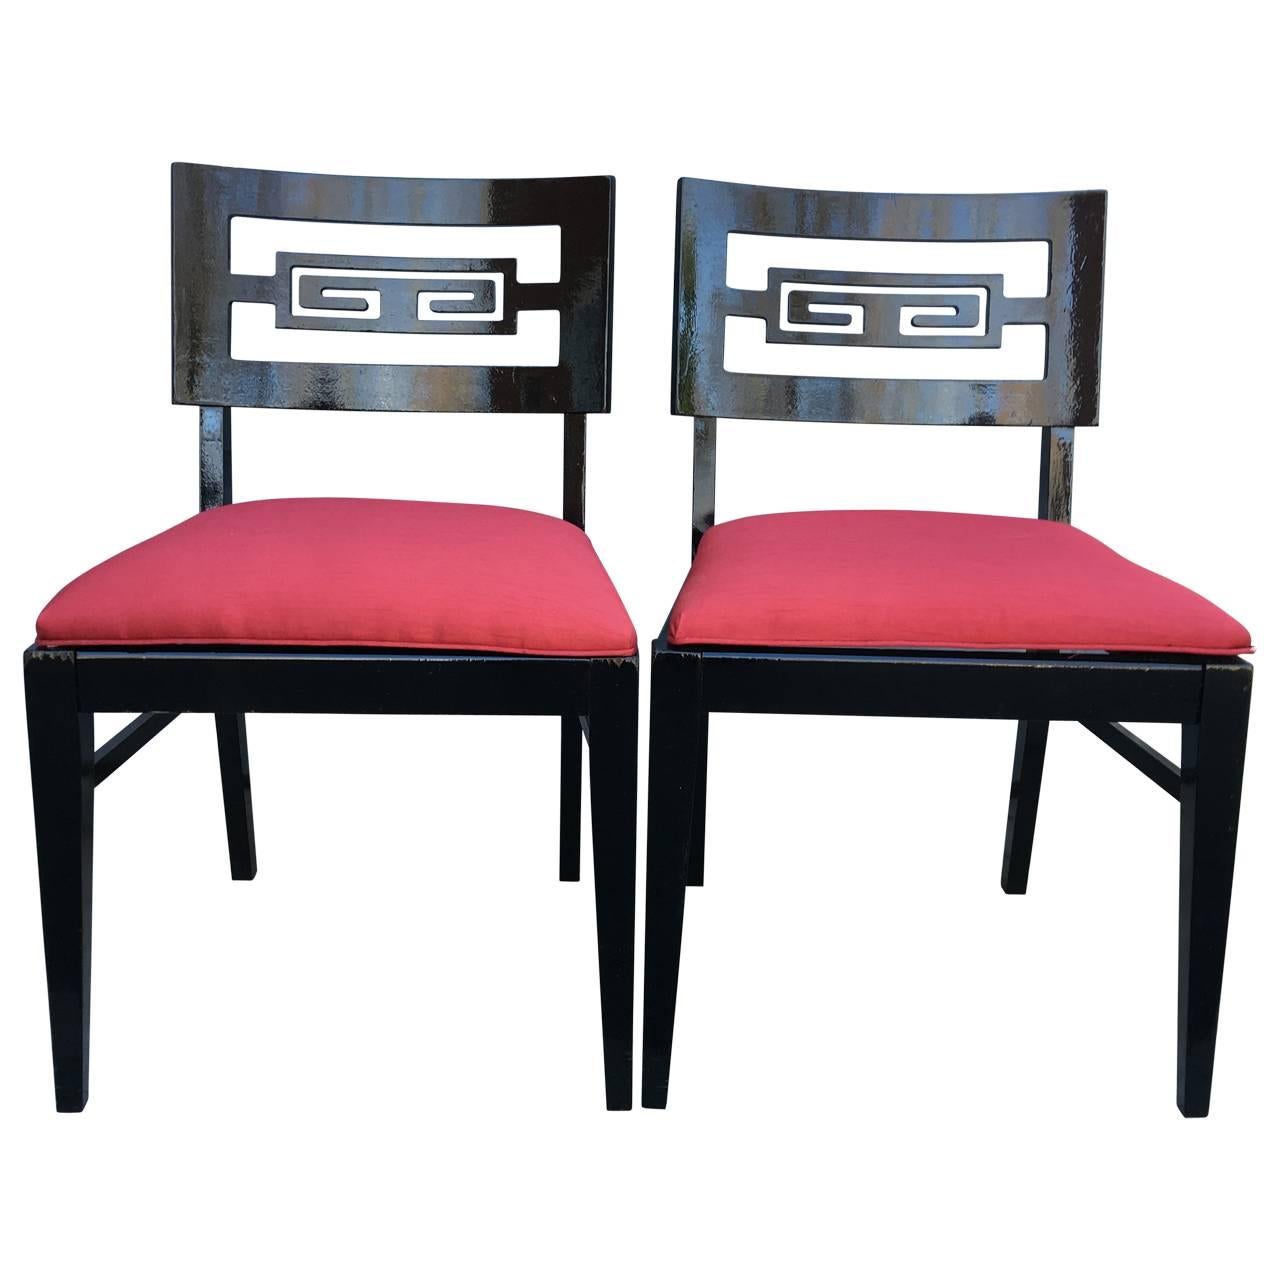 Set of two armchairs and two dining chairs by James Mont style dining chairs in high glossy black paint.